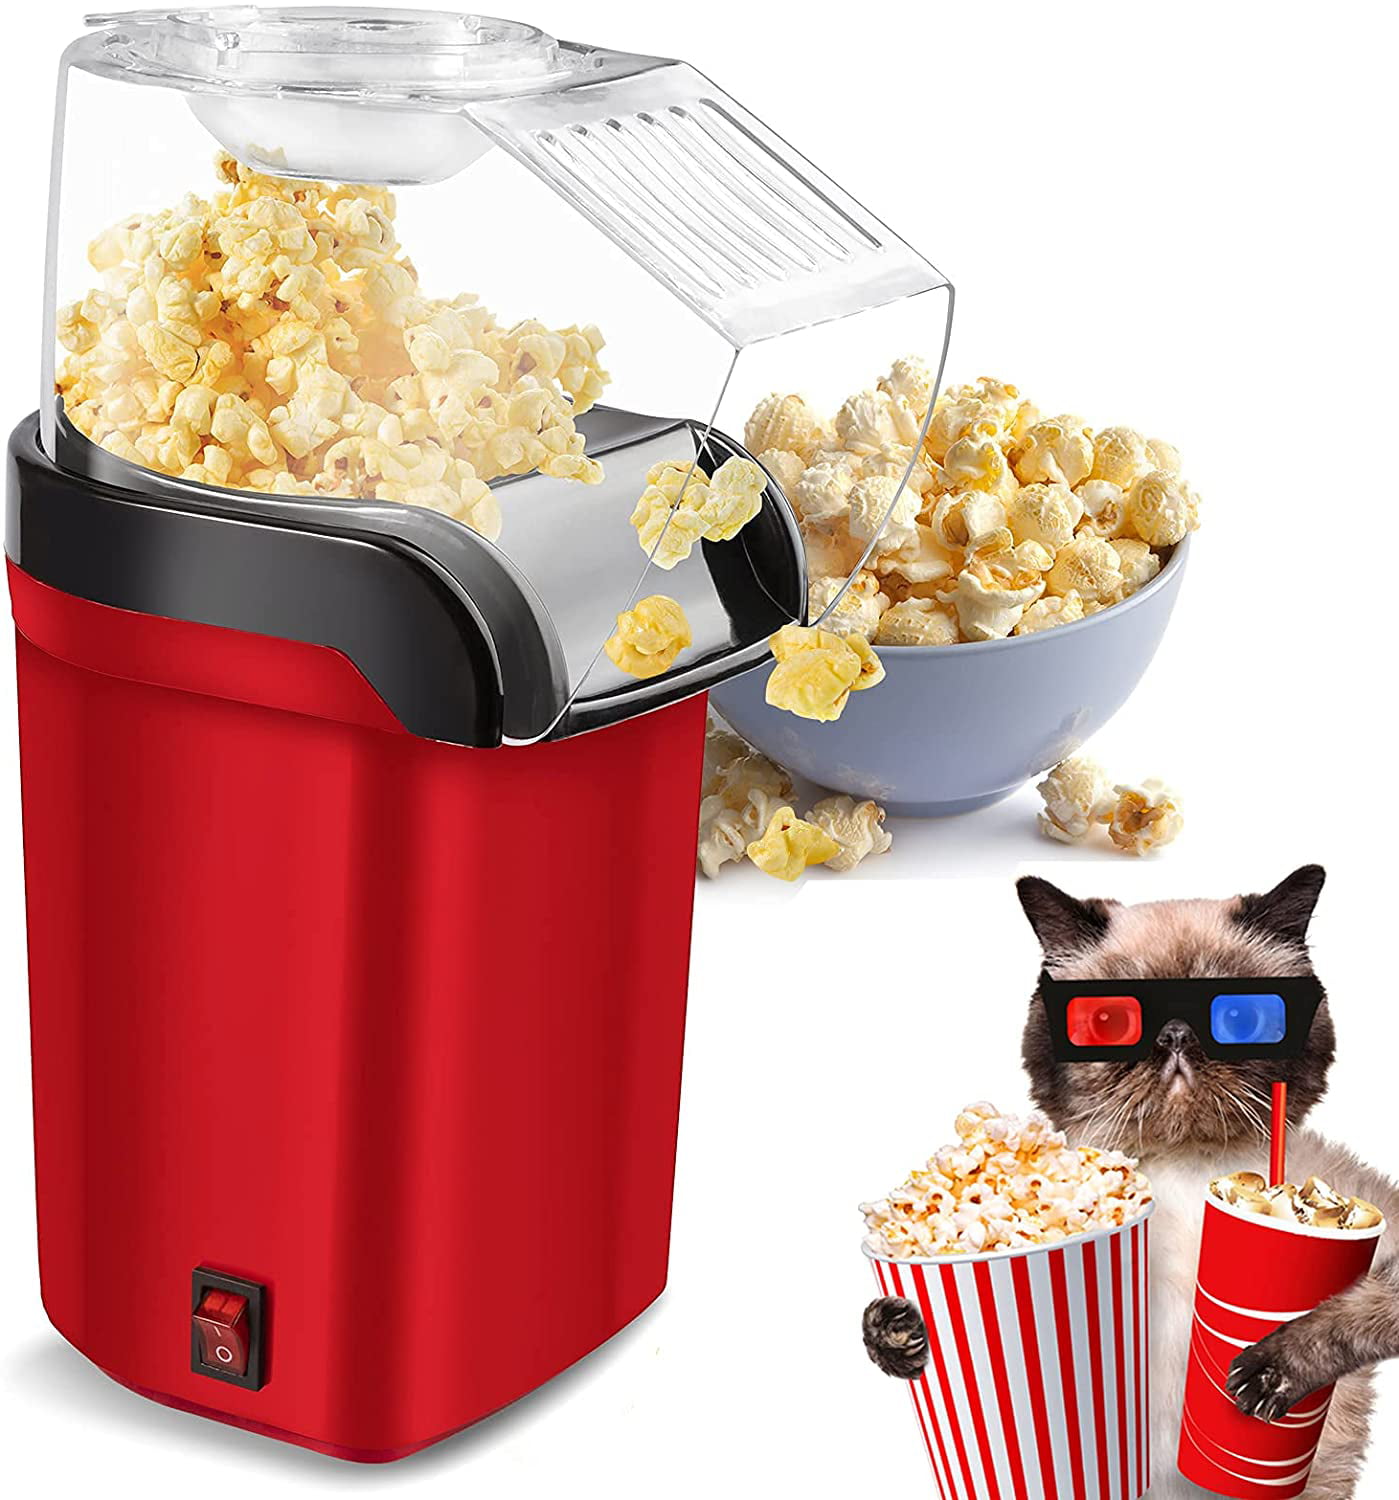 No Oil Needed Great For Kids 1200W Popcorn Popper with Measuring Cup and Removable Lid for Watching Movies and Holding Parties in Home Red Popcorn Machine Hot Air Popcorn Maker 